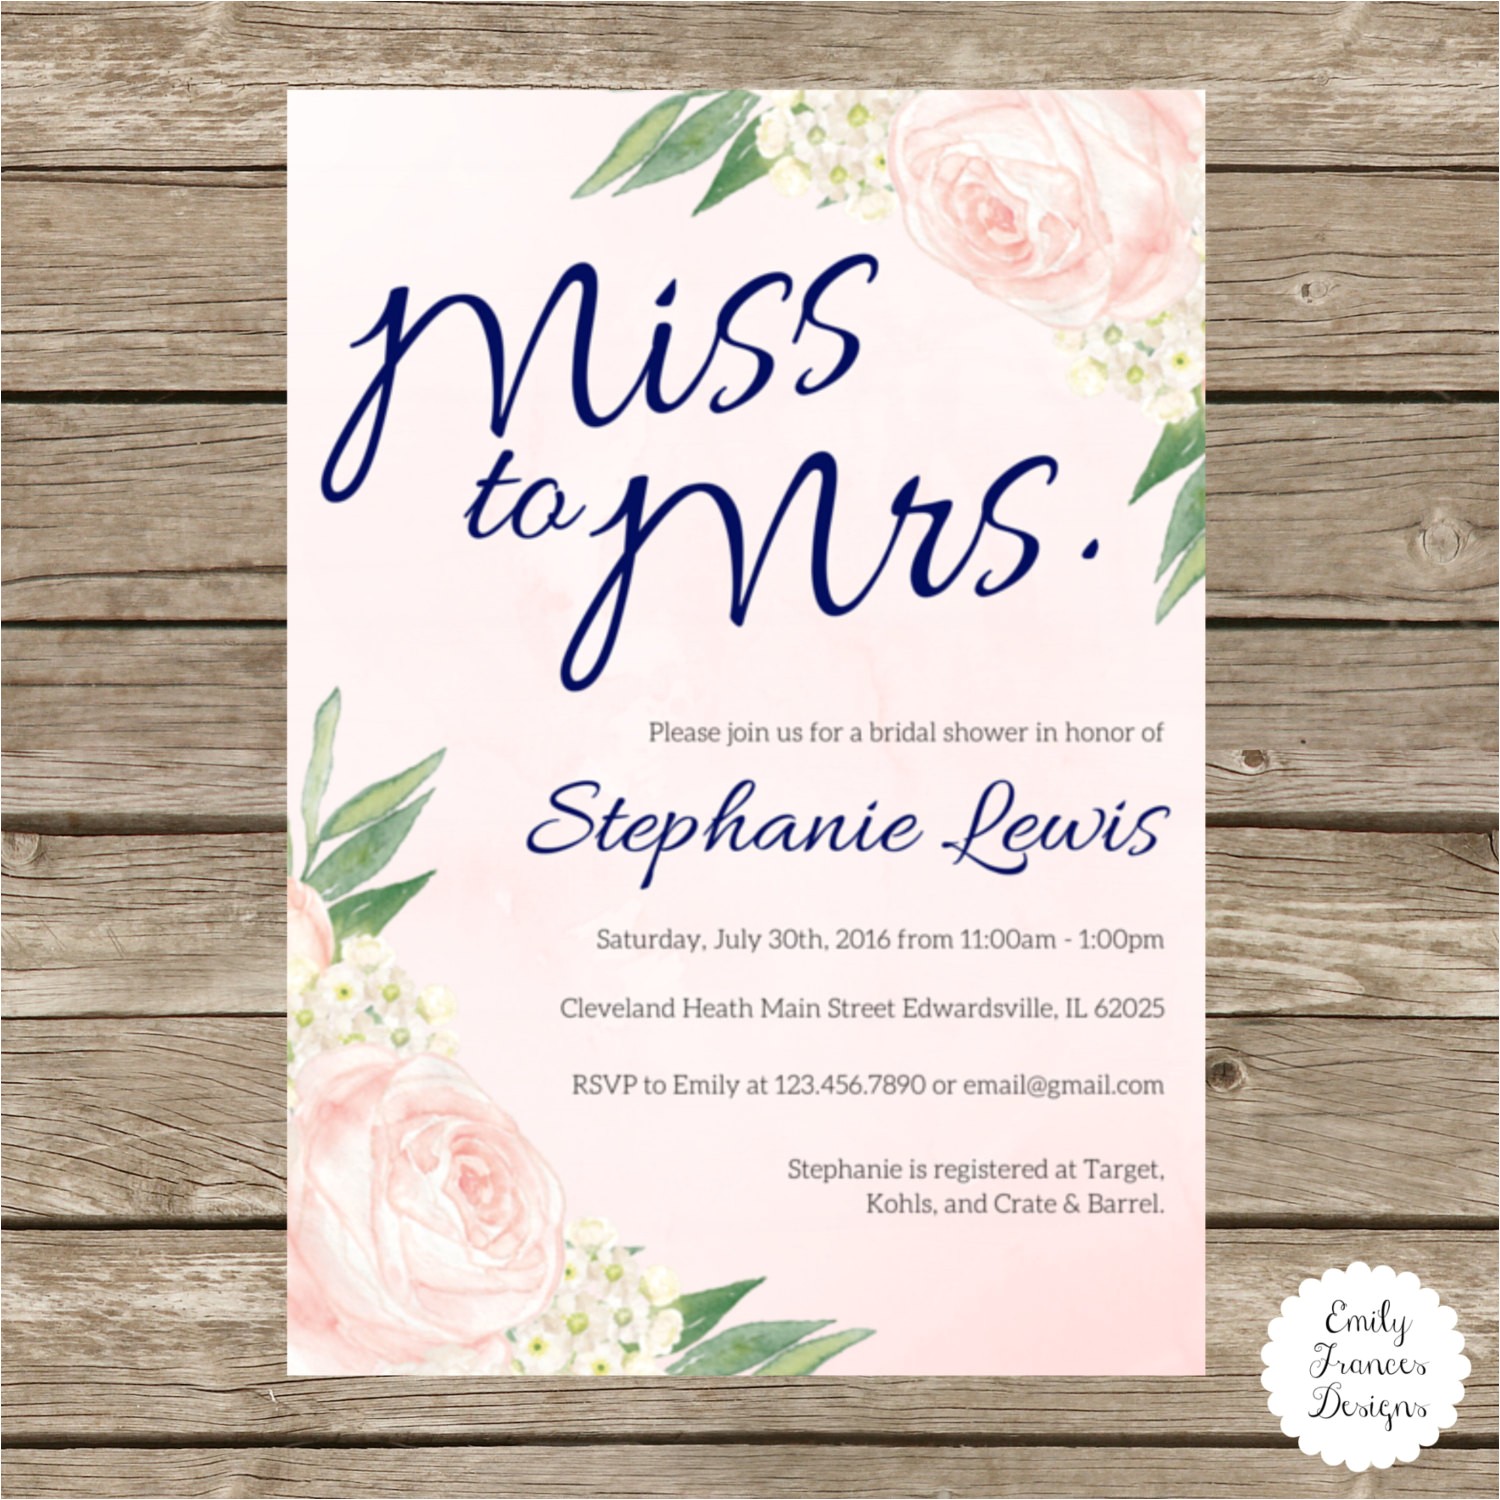 Miss to Mrs Bridal Shower Invitations Miss to Mrs Bridal Shower Invitation Blush Pink and Navy